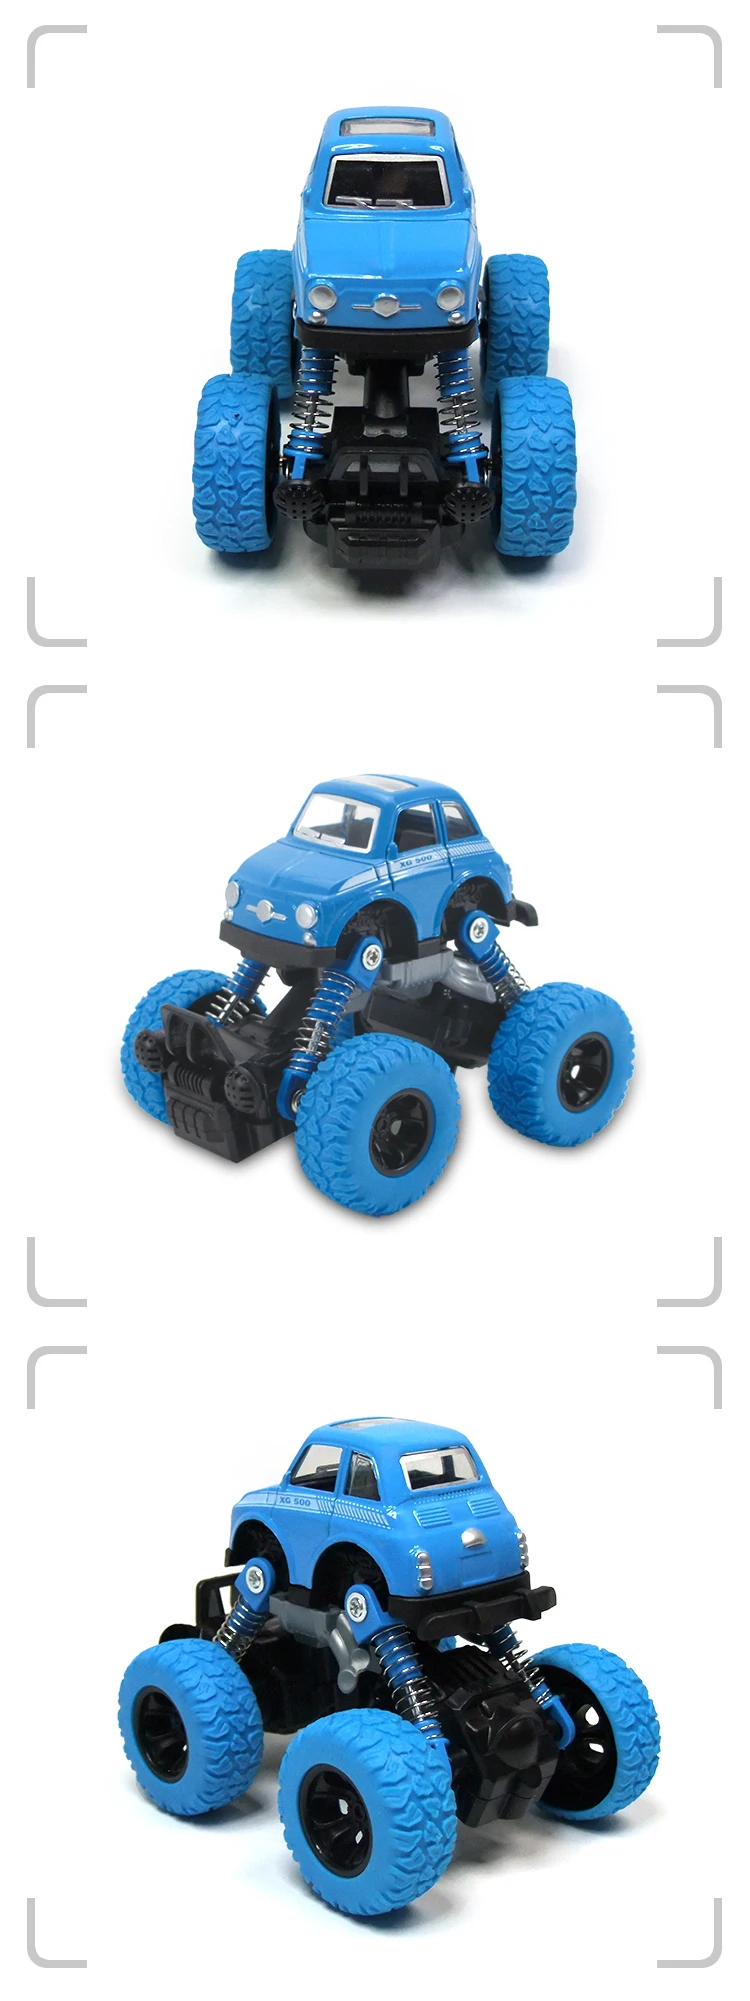 Amazon best selling 4 styles alloy pull back car vehicle toy with shockproof device